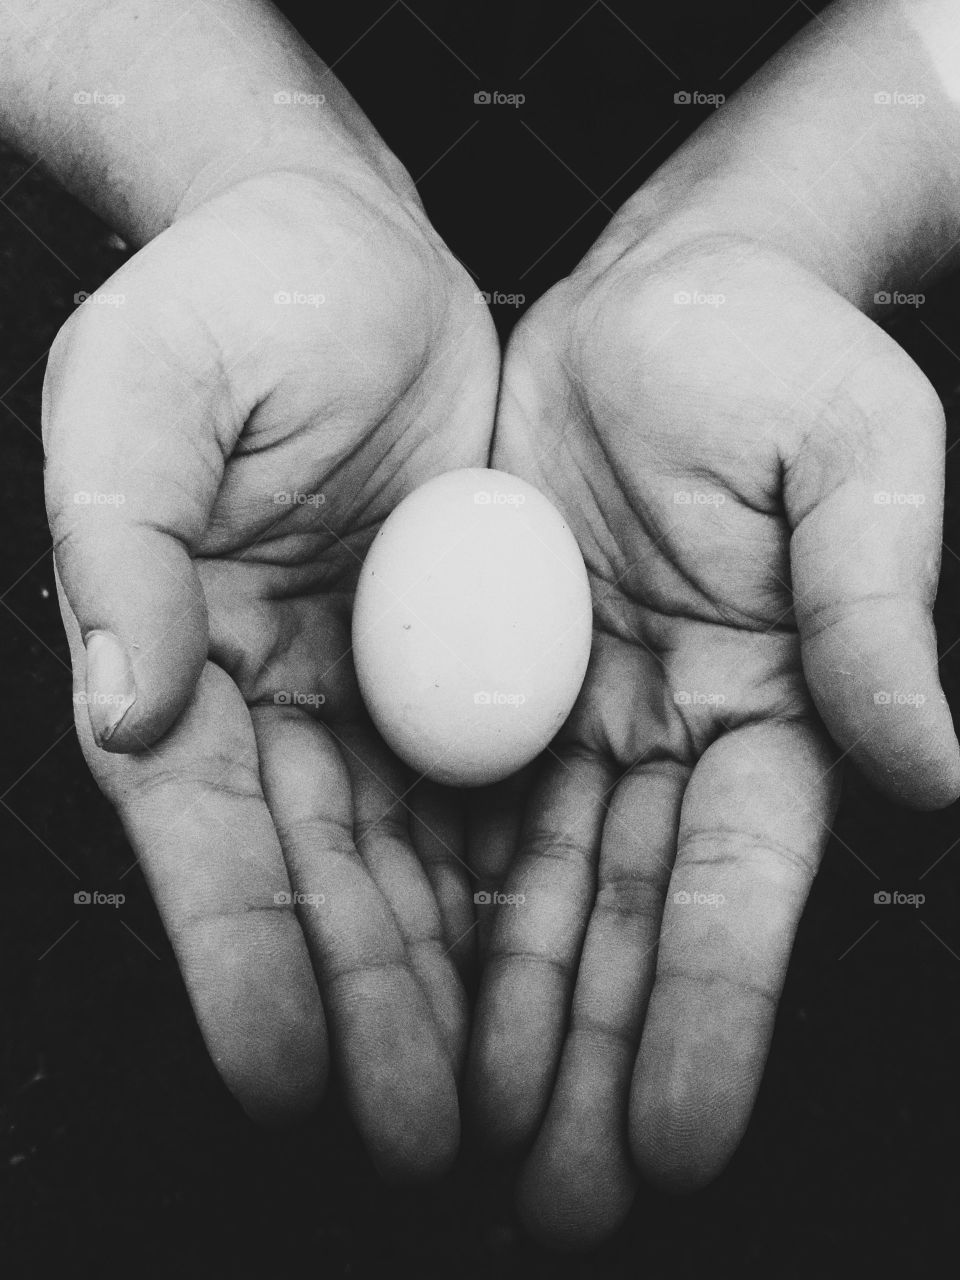 egg in hands black and white monochrome photo